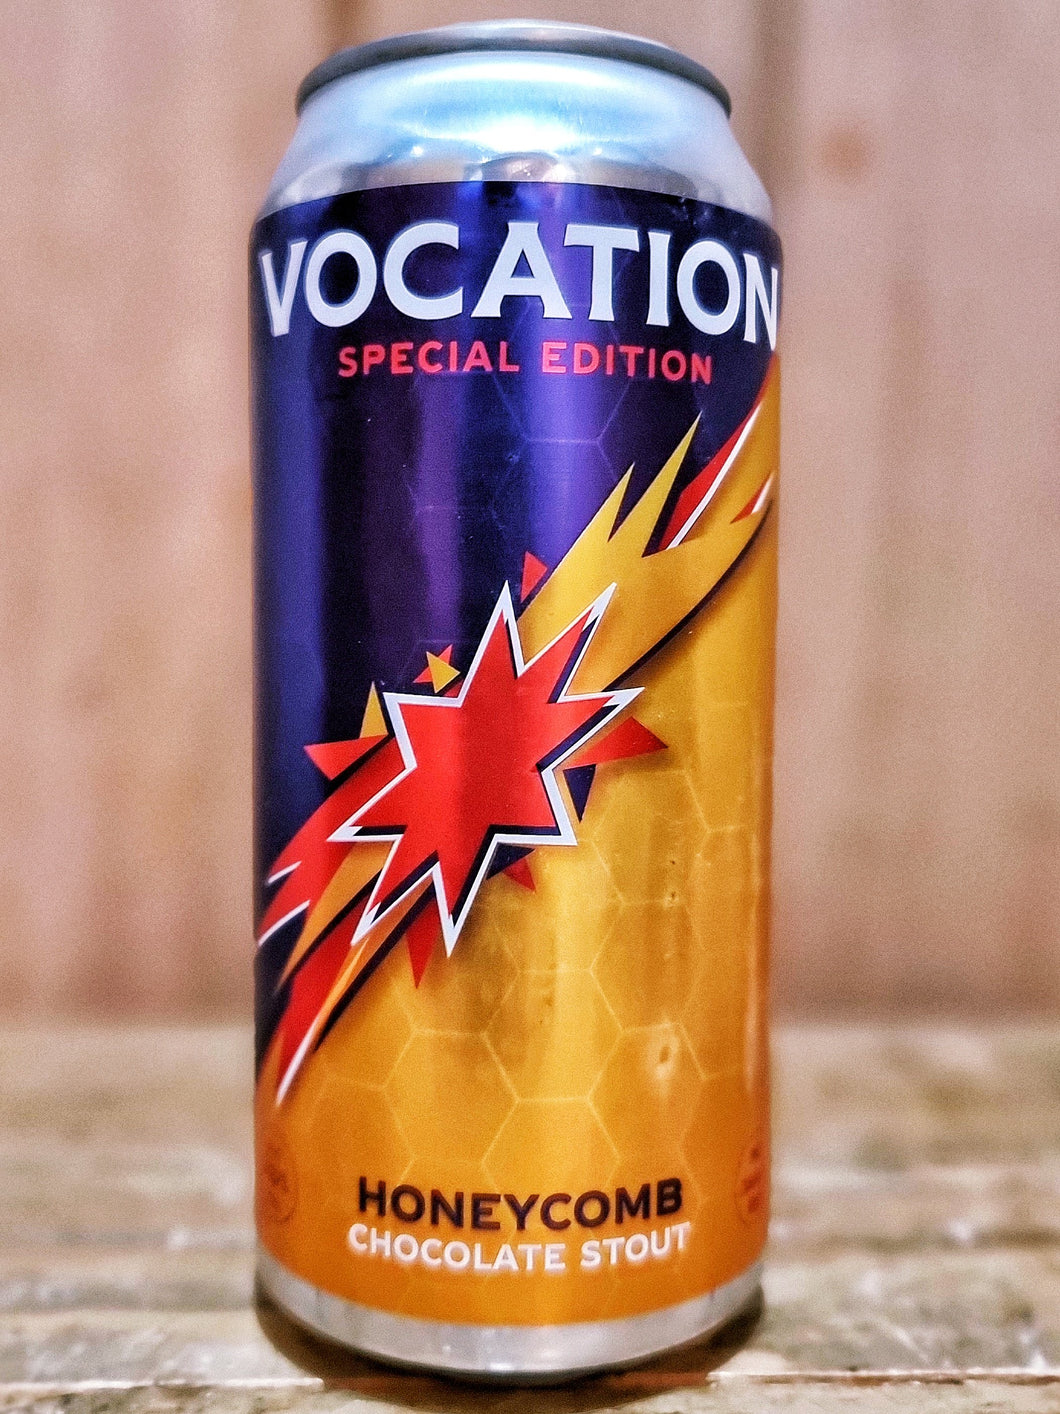 Vocation Brewery - Honeycomb Stout